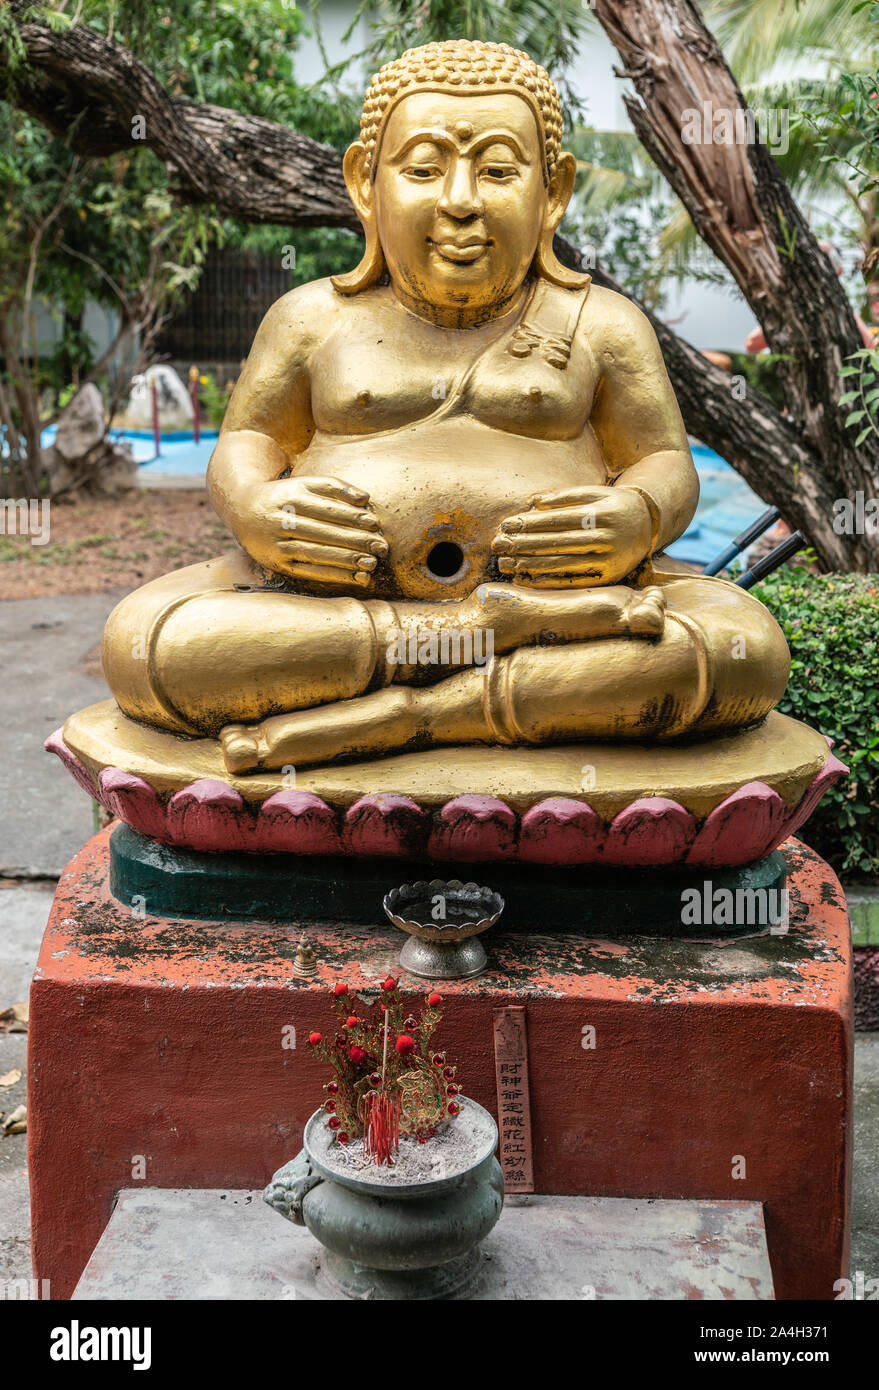 Bang Saen, Thailand - March 16, 2019: Wang Saensuk Buddhist Monastery. Gilded happy Buddha statue in garden, sitting on lotus, incense and flowers in Stock Photo